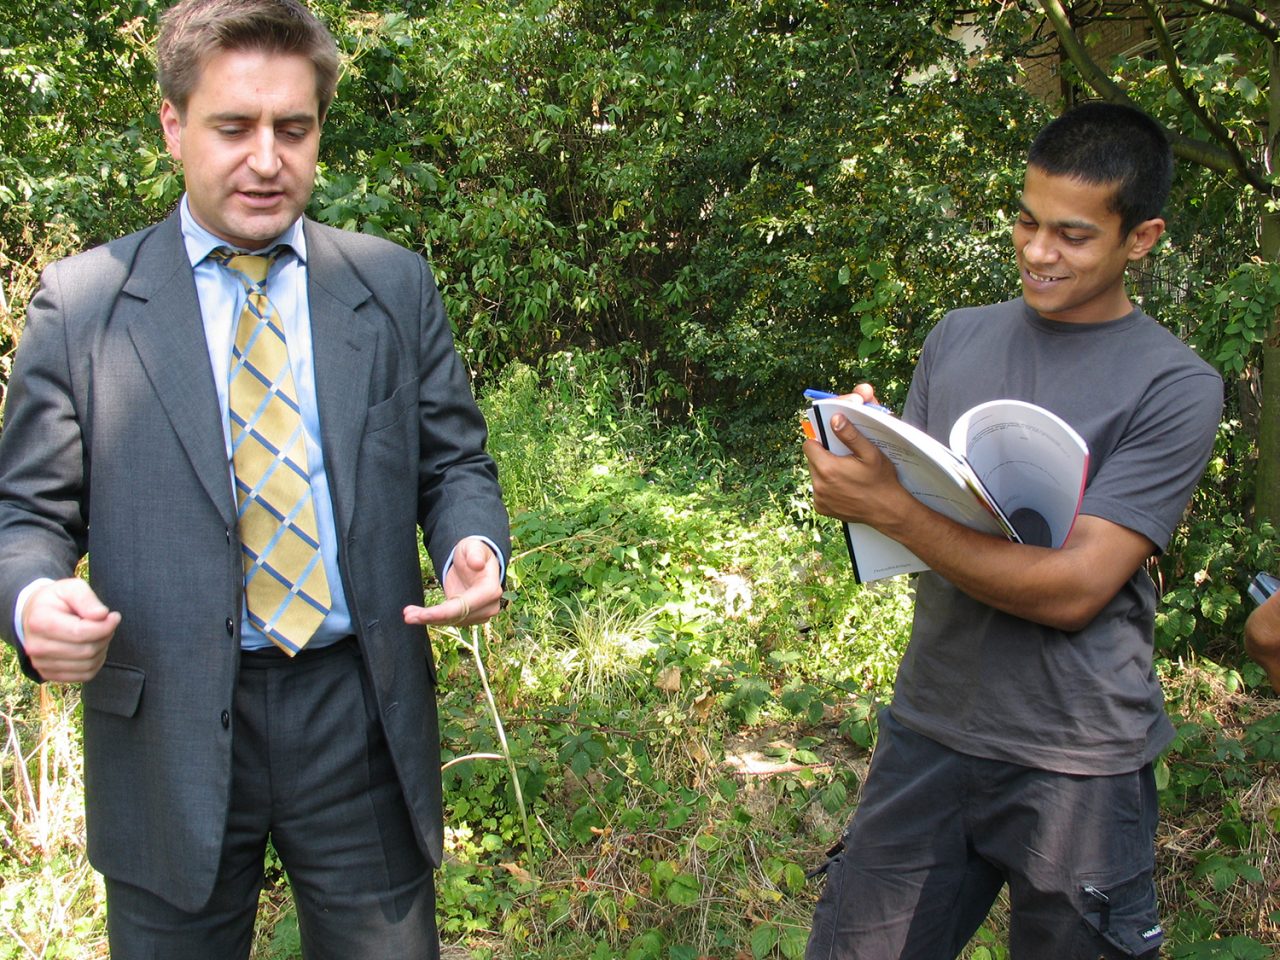 Image of the artist giving a stranger a plot of land as a gift through a paper contract in Burgess Park.